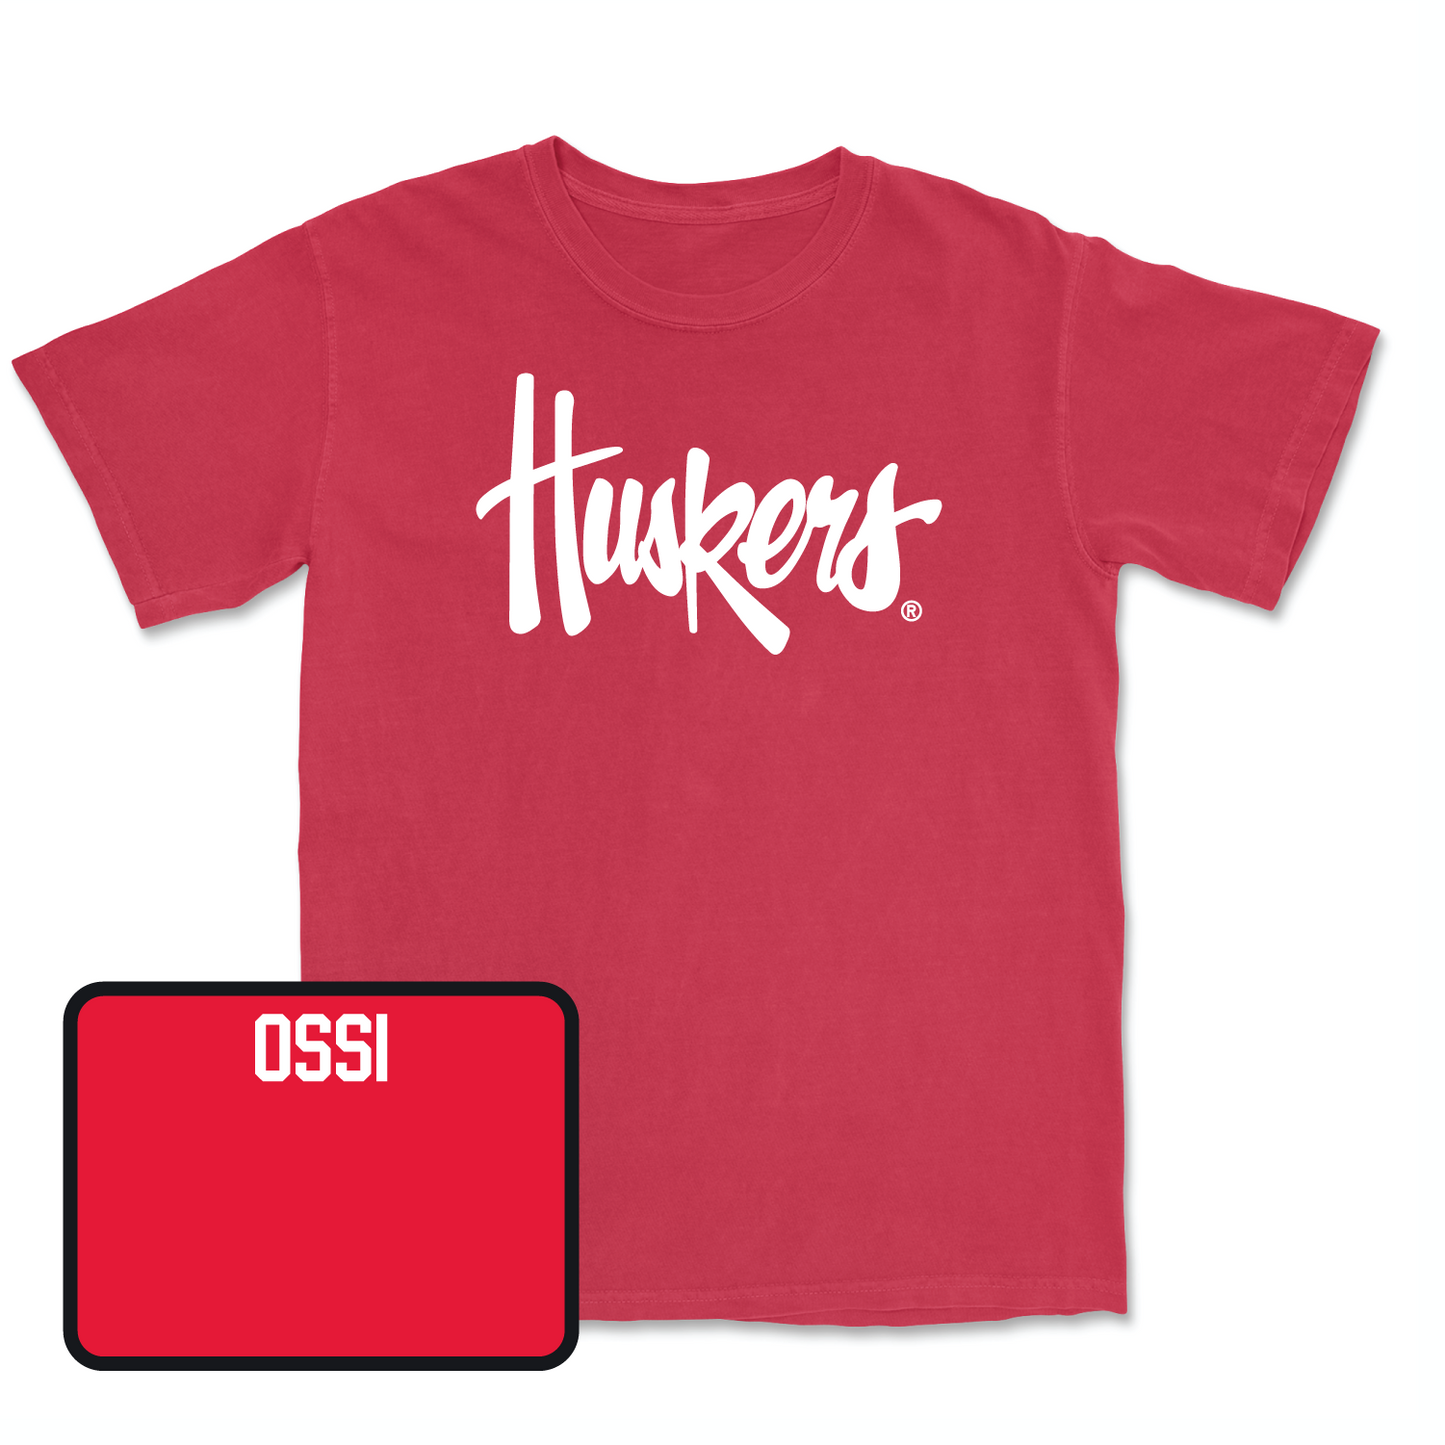 Red Women's Rifle Huskers Tee Youth Small / Cecelia Ossi